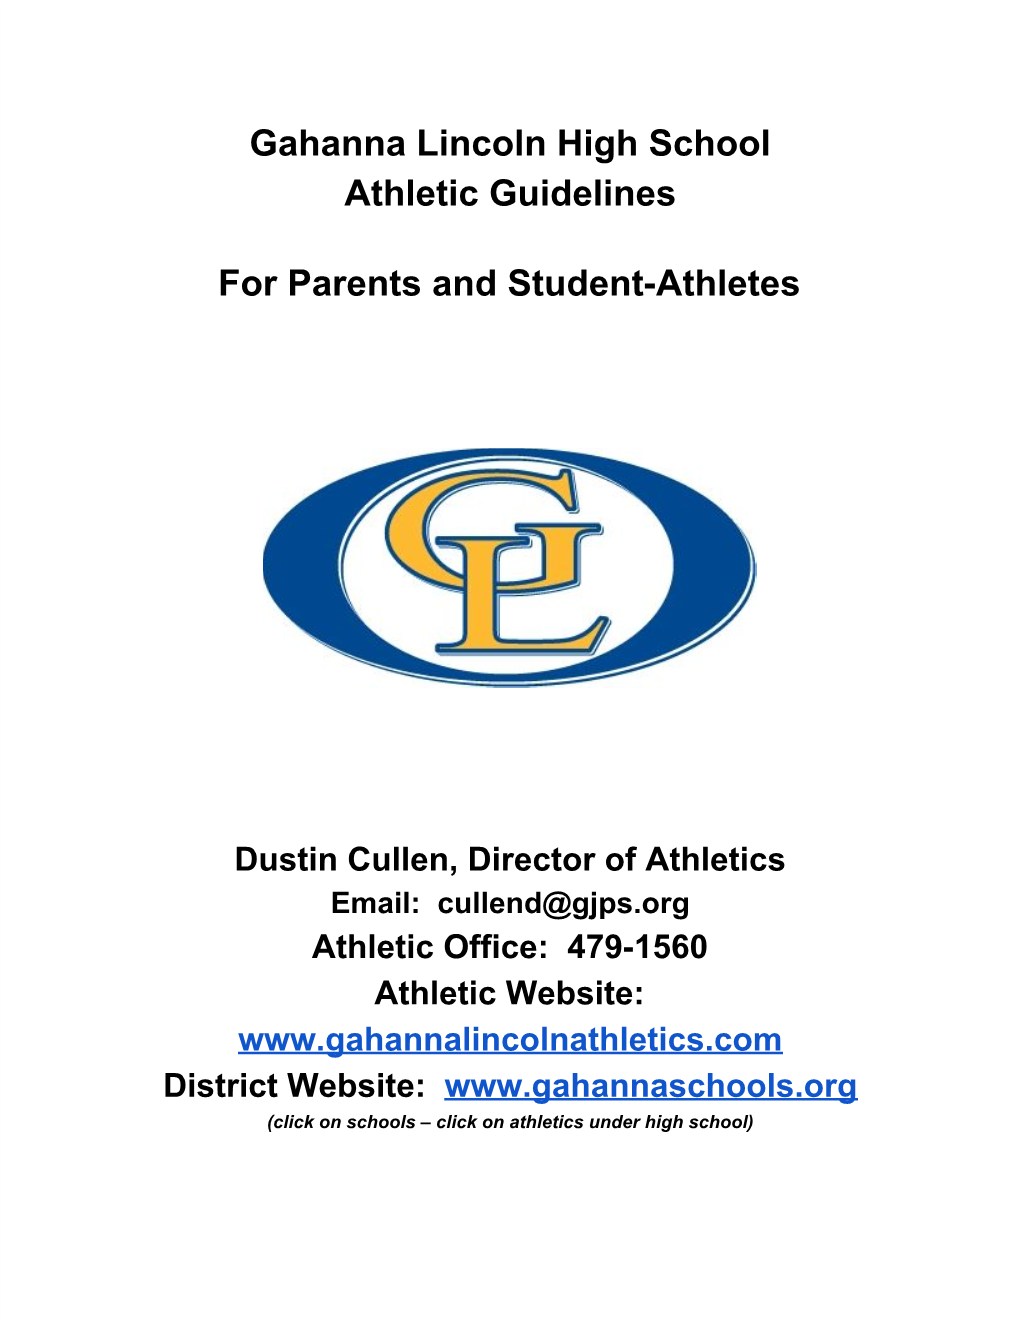 Gahanna Lincoln High School Athletic Guidelines for Parents And